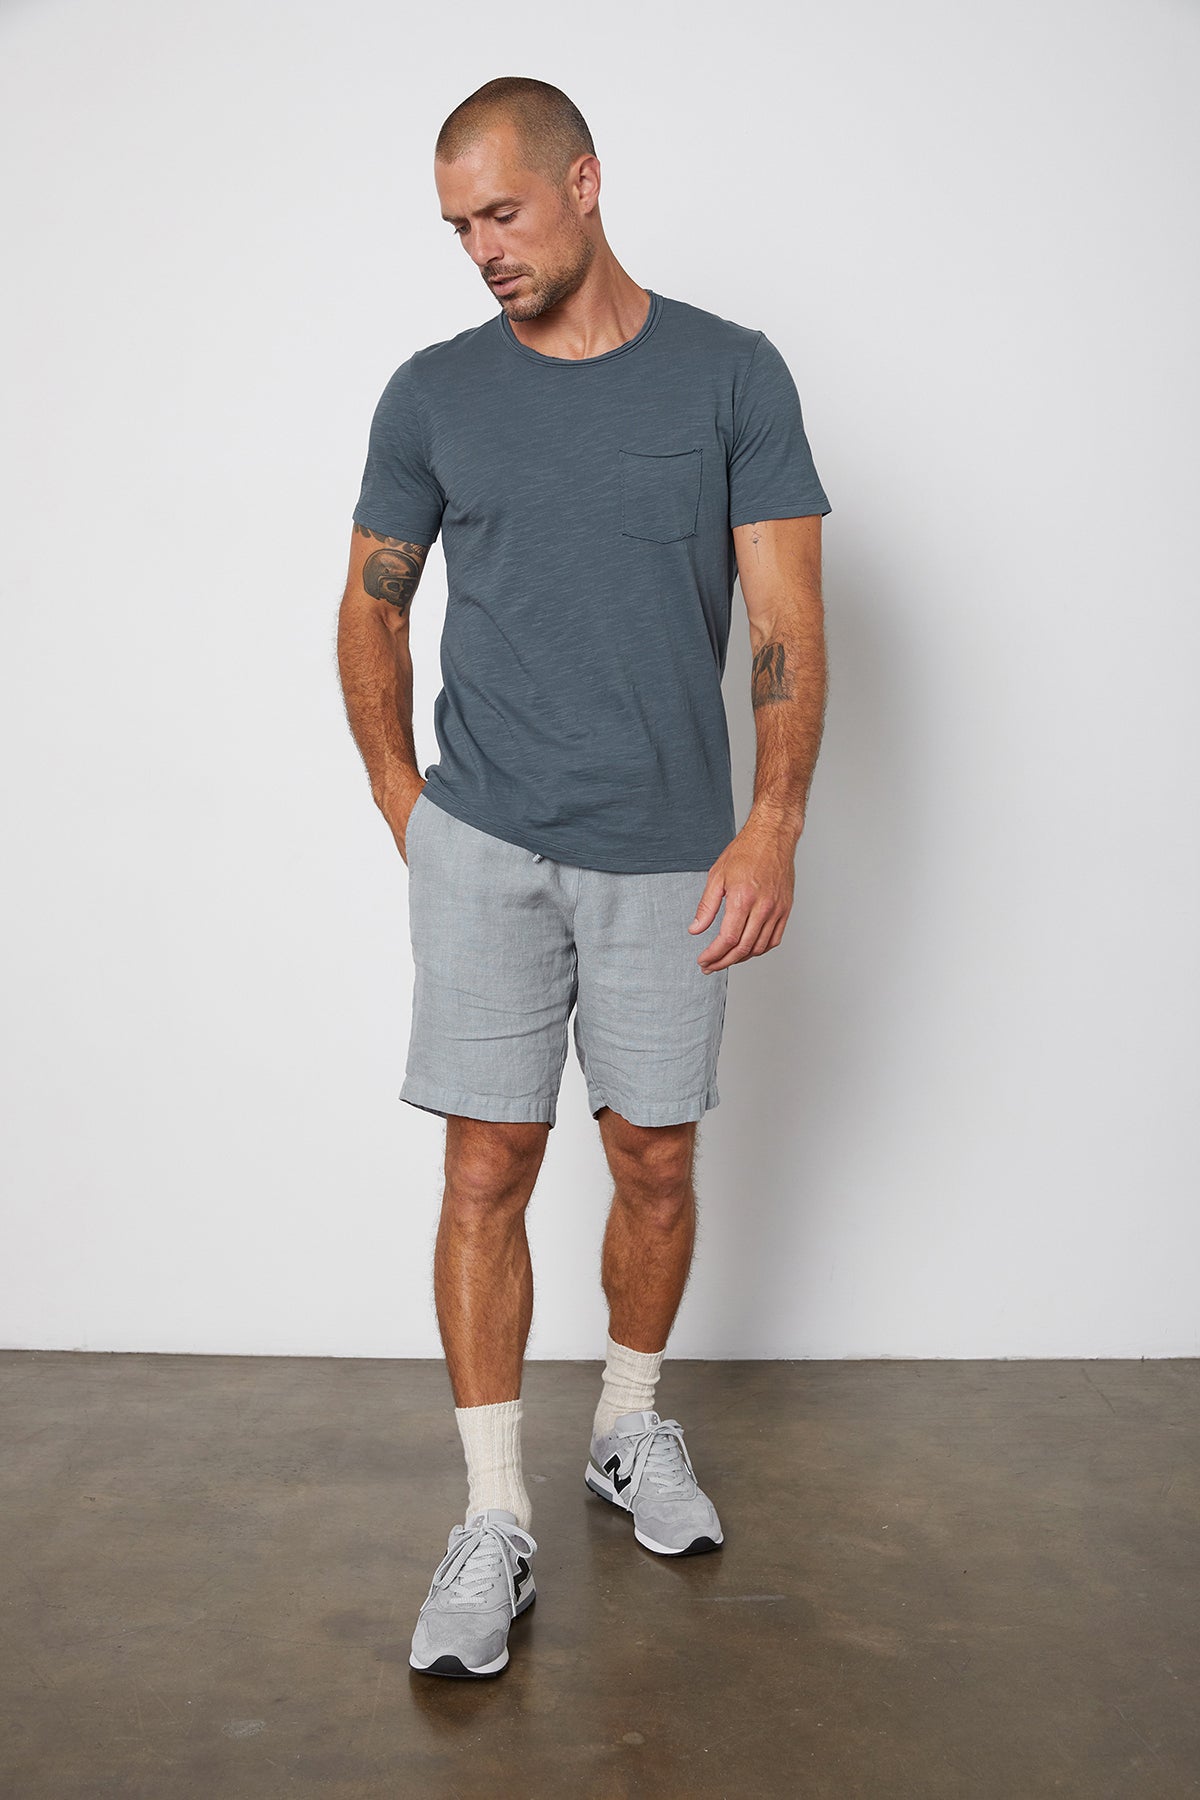   Chad slub cotton tee with raw edges and front pocket in malachite, with Jonathan shorts in chambray with model's hand in pocket. 